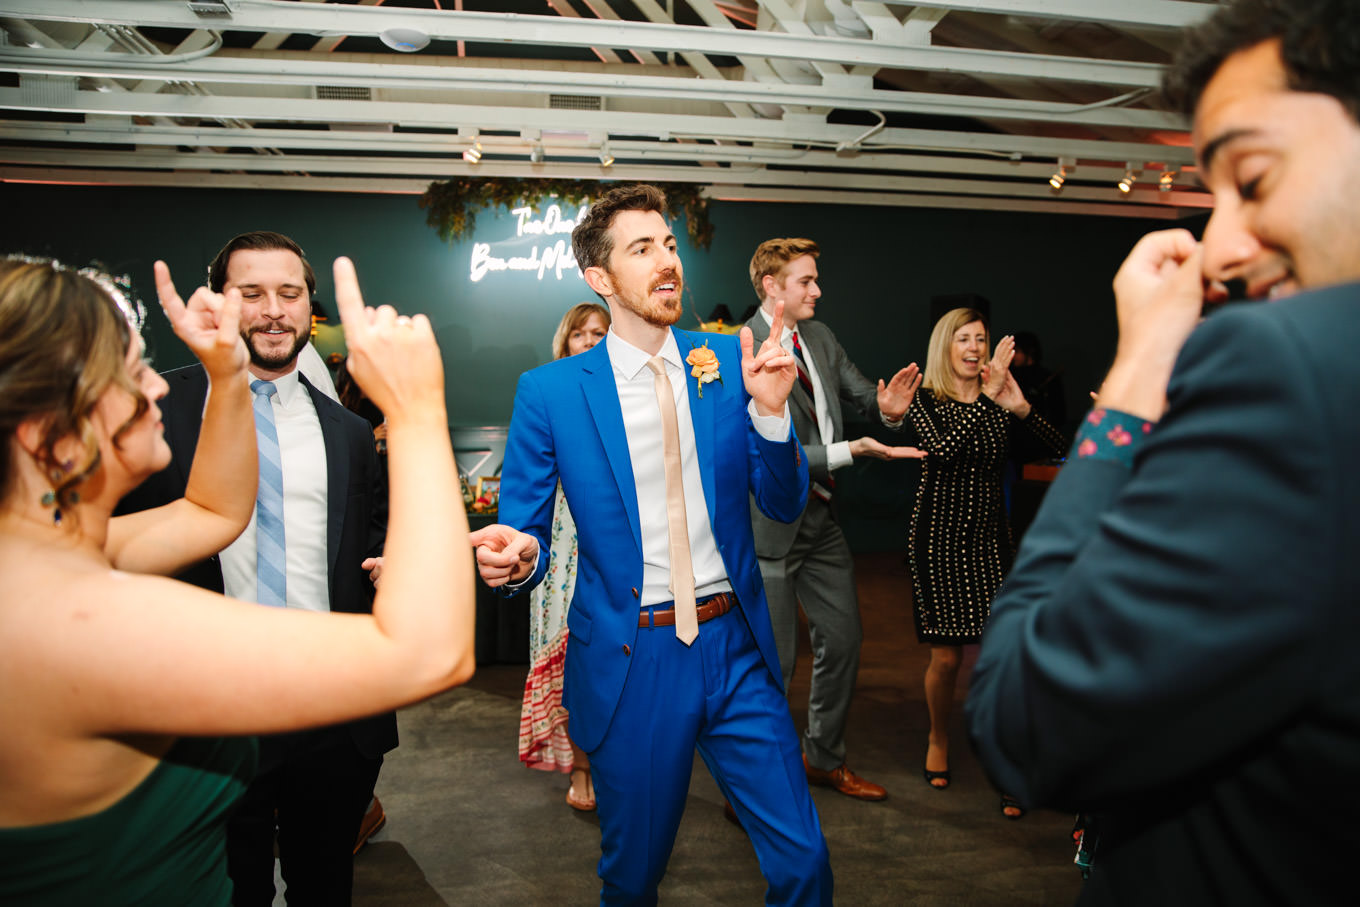 Dancing at wedding reception | TV inspired wedding at The Fig House Los Angeles | Published on The Knot | Fresh and colorful photography for fun-loving couples in Southern California | #losangeleswedding #TVwedding #colorfulwedding #theknot   Source: Mary Costa Photography | Los Angeles wedding photographer